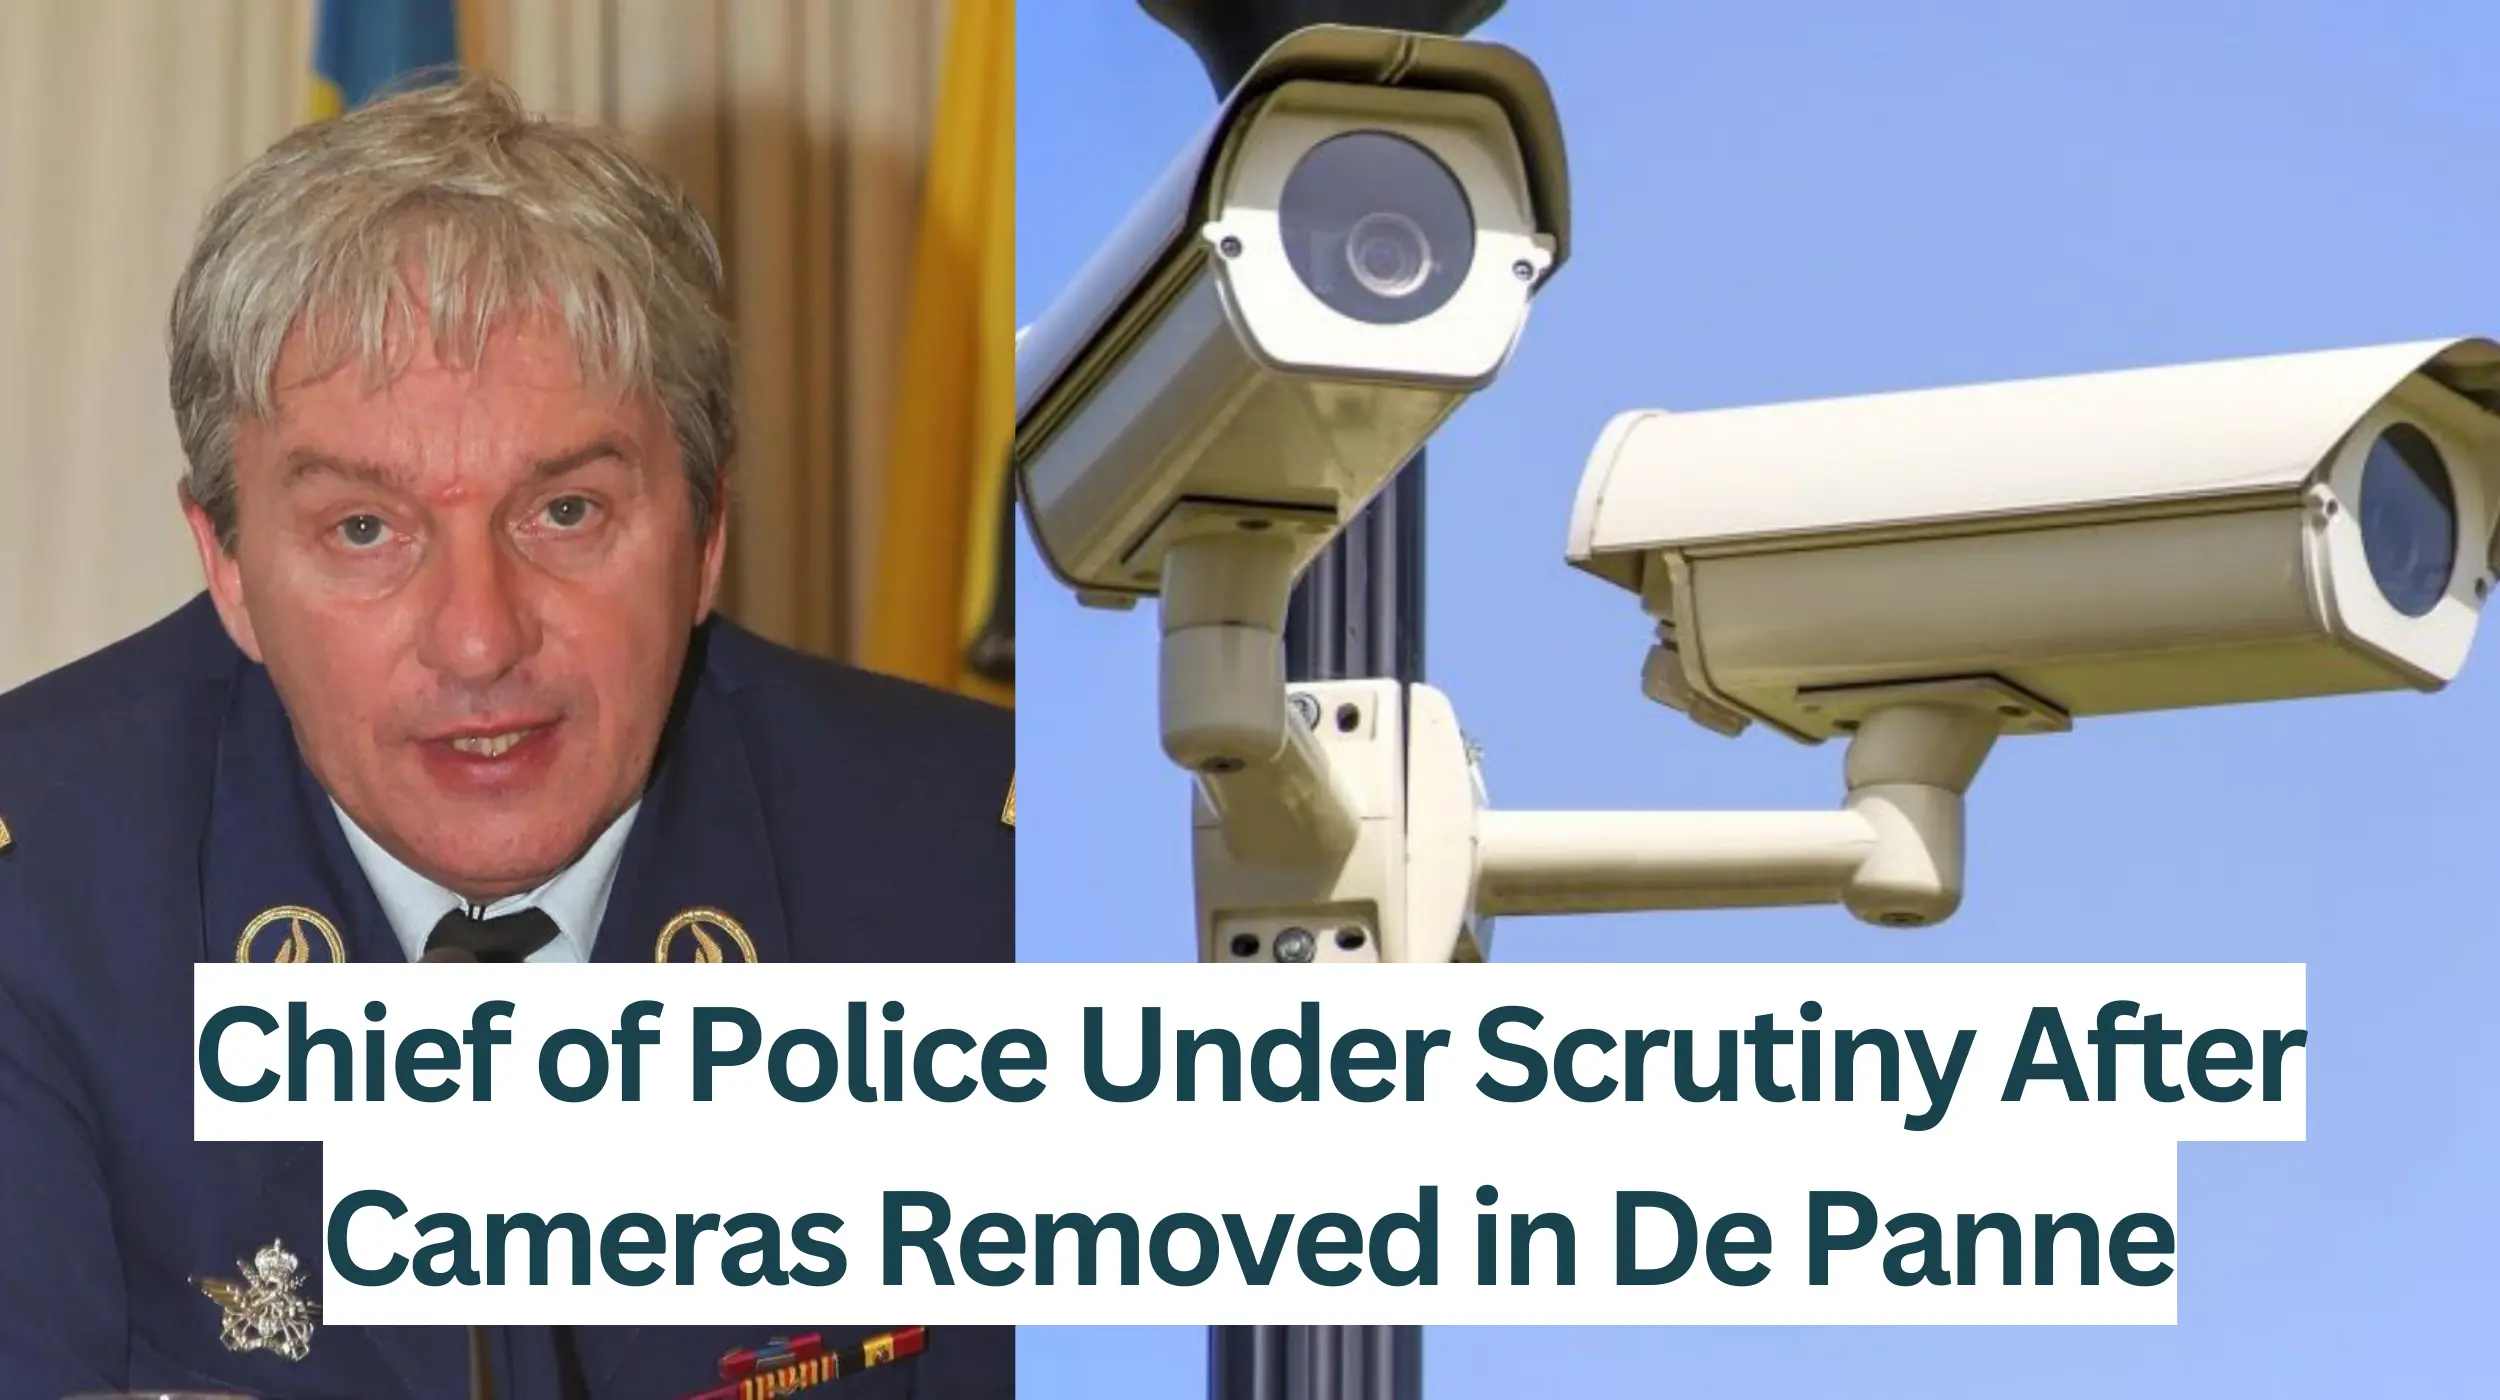 Chief-of-Police-Under-Scrutiny-After-Cameras-Removed-in-De-Panne